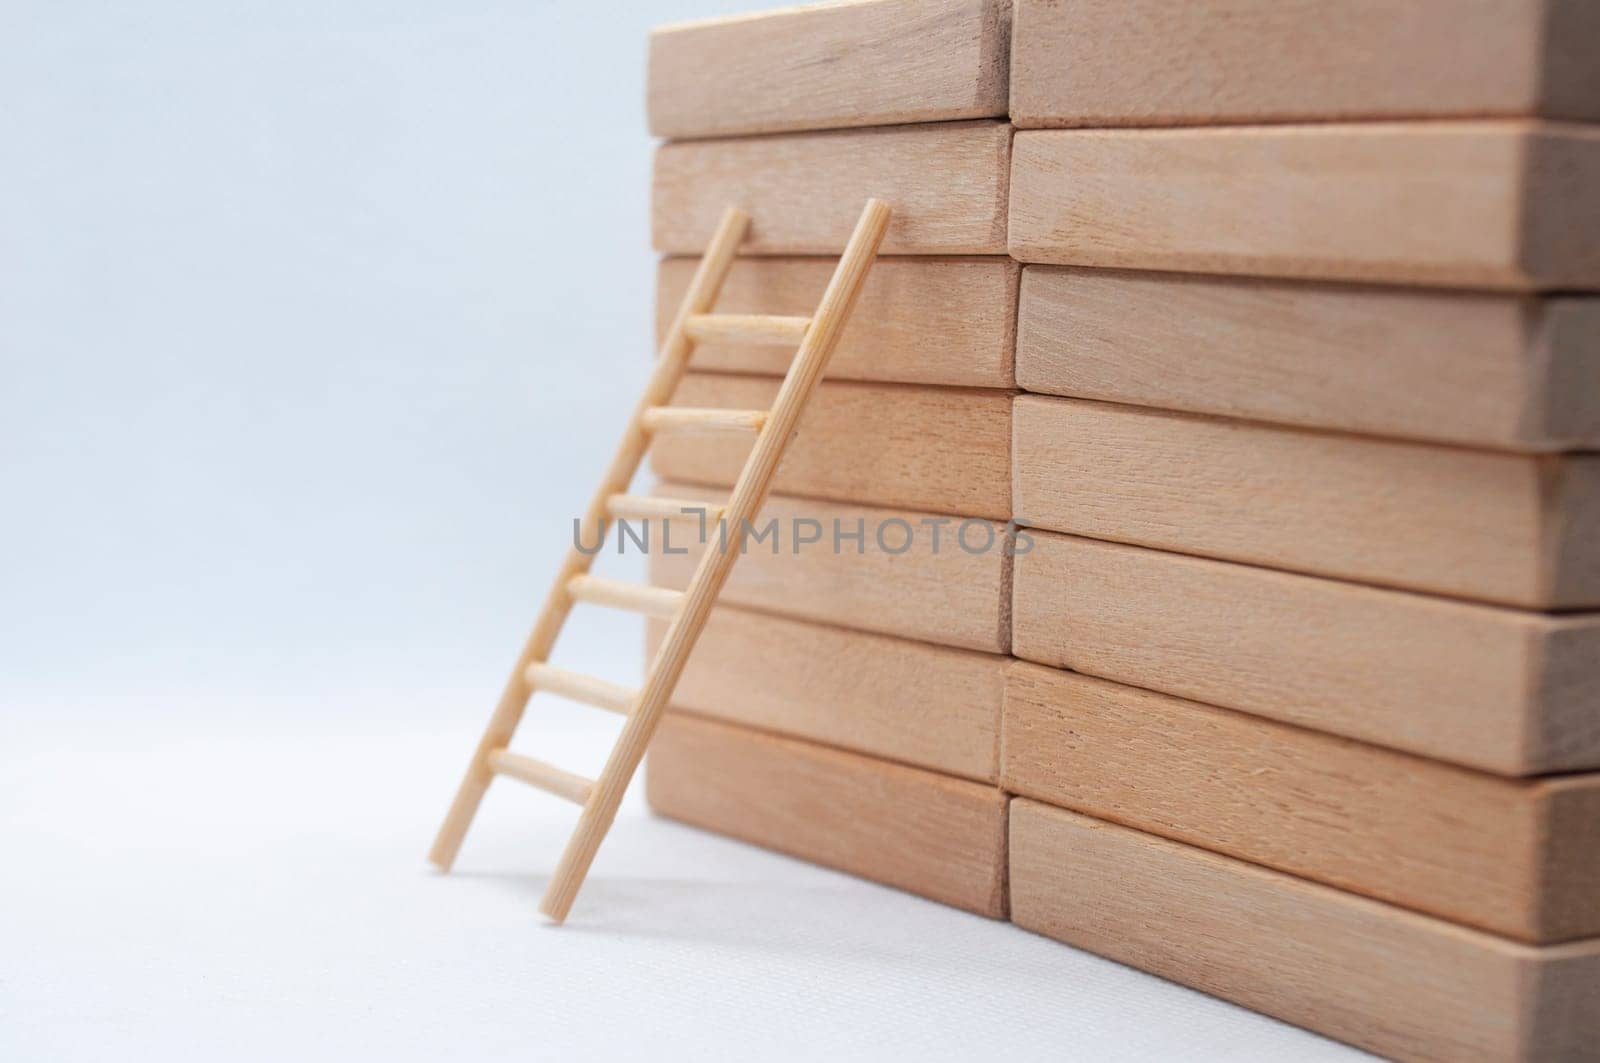 Ladder on a wooden blocks with customizable space for text.